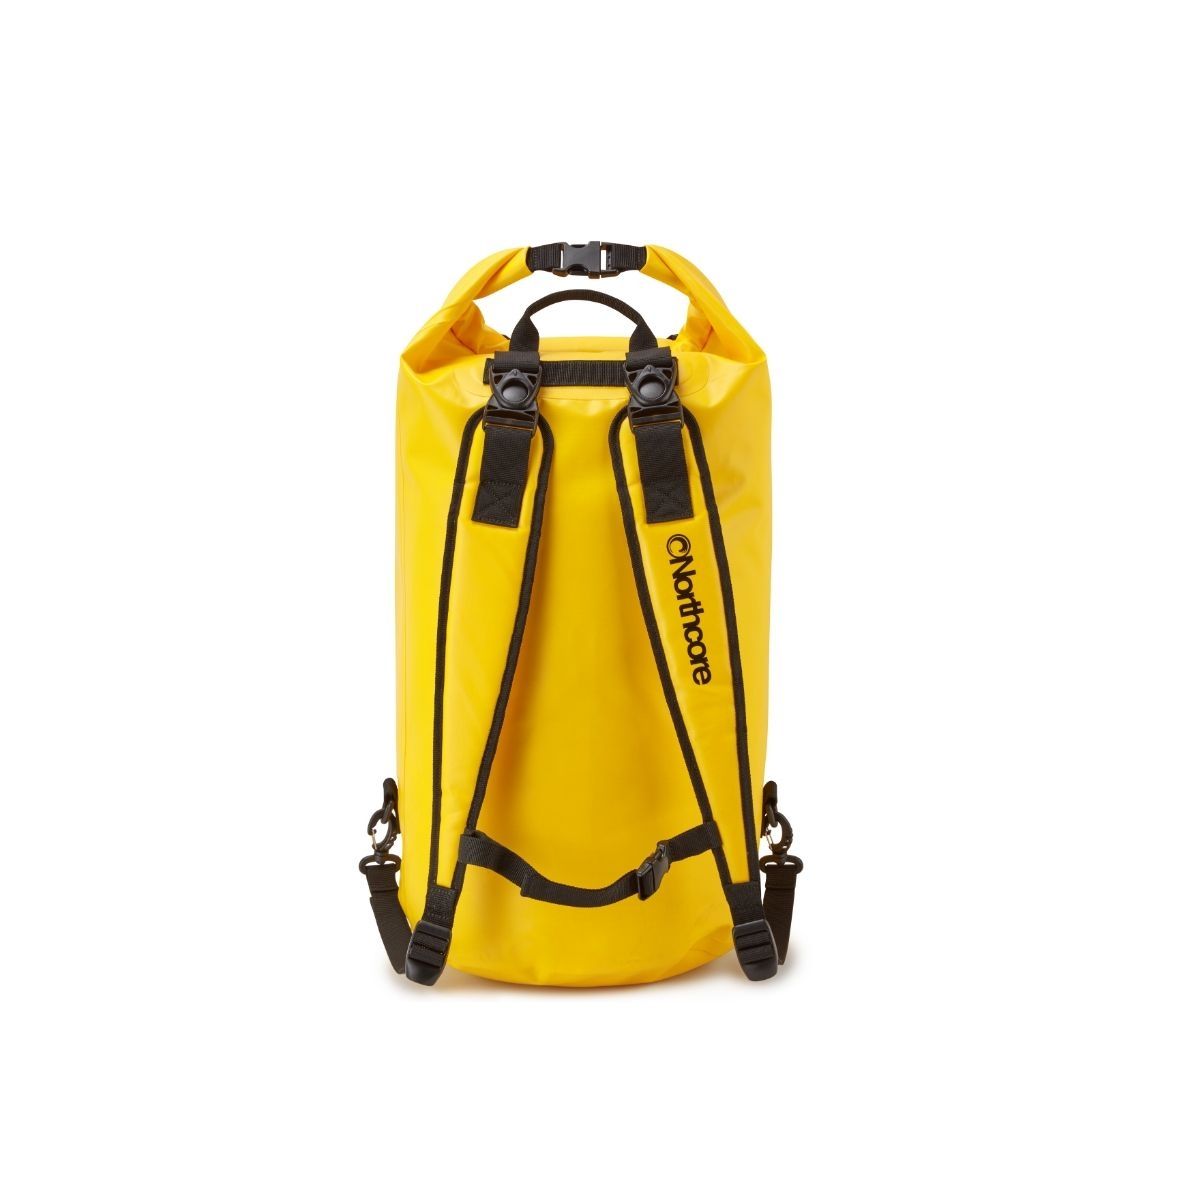 NORTHCORE™ DRY BAG - 20L BACKPACK (YELLOW)